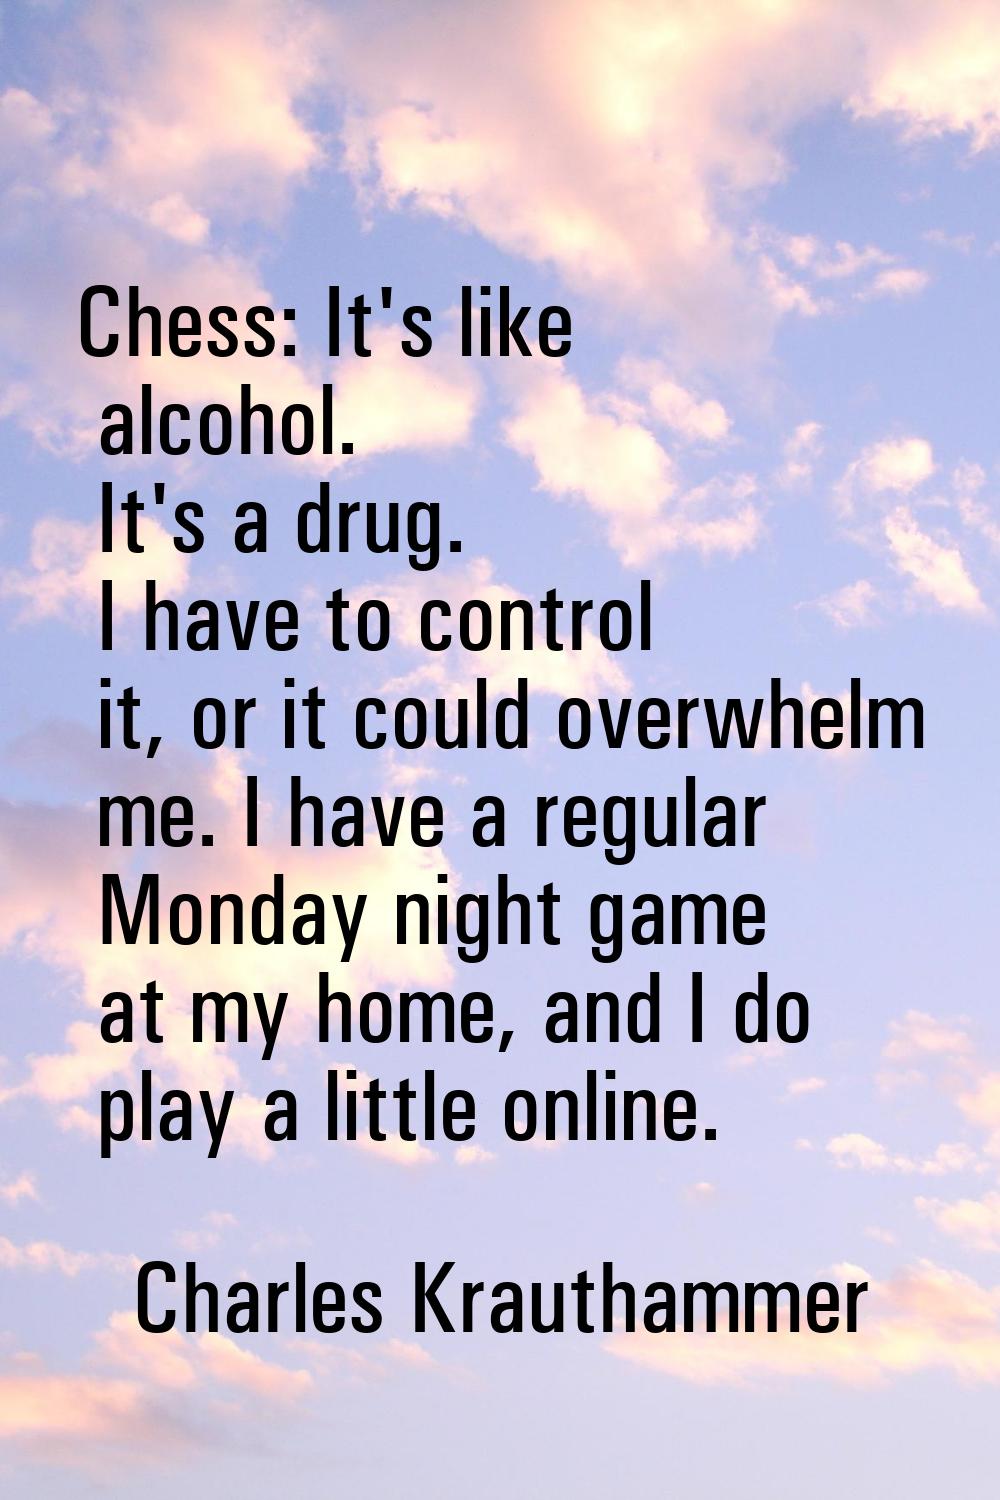 Chess: It's like alcohol. It's a drug. I have to control it, or it could overwhelm me. I have a reg